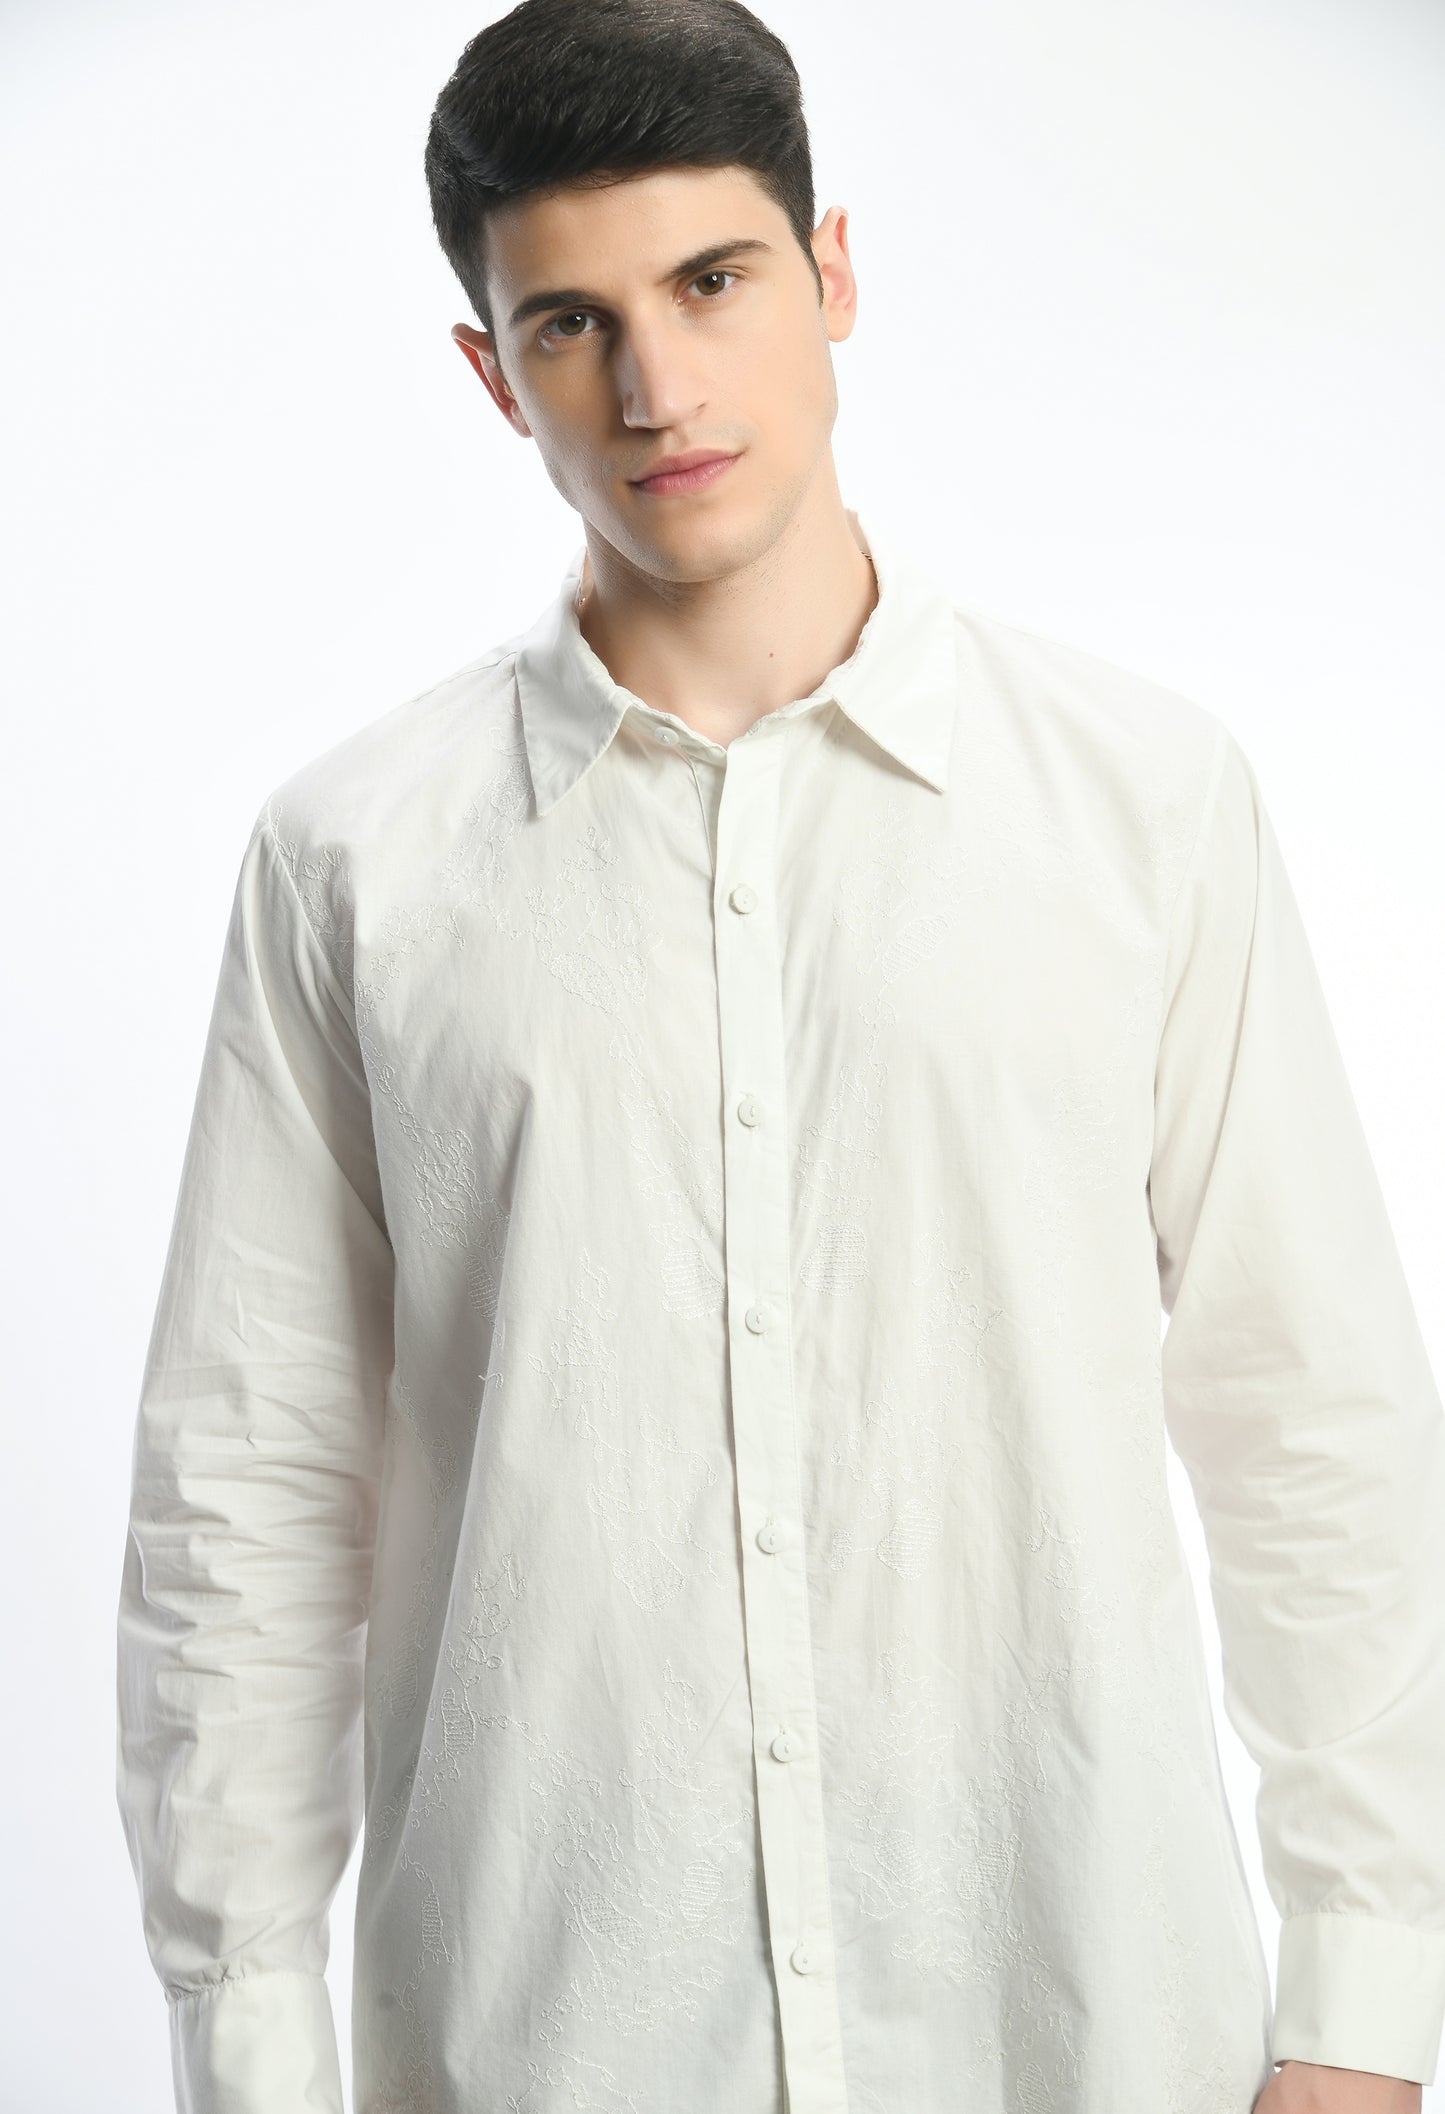 A white cotton shirt showcasing tone on tone abstract thread embroidery